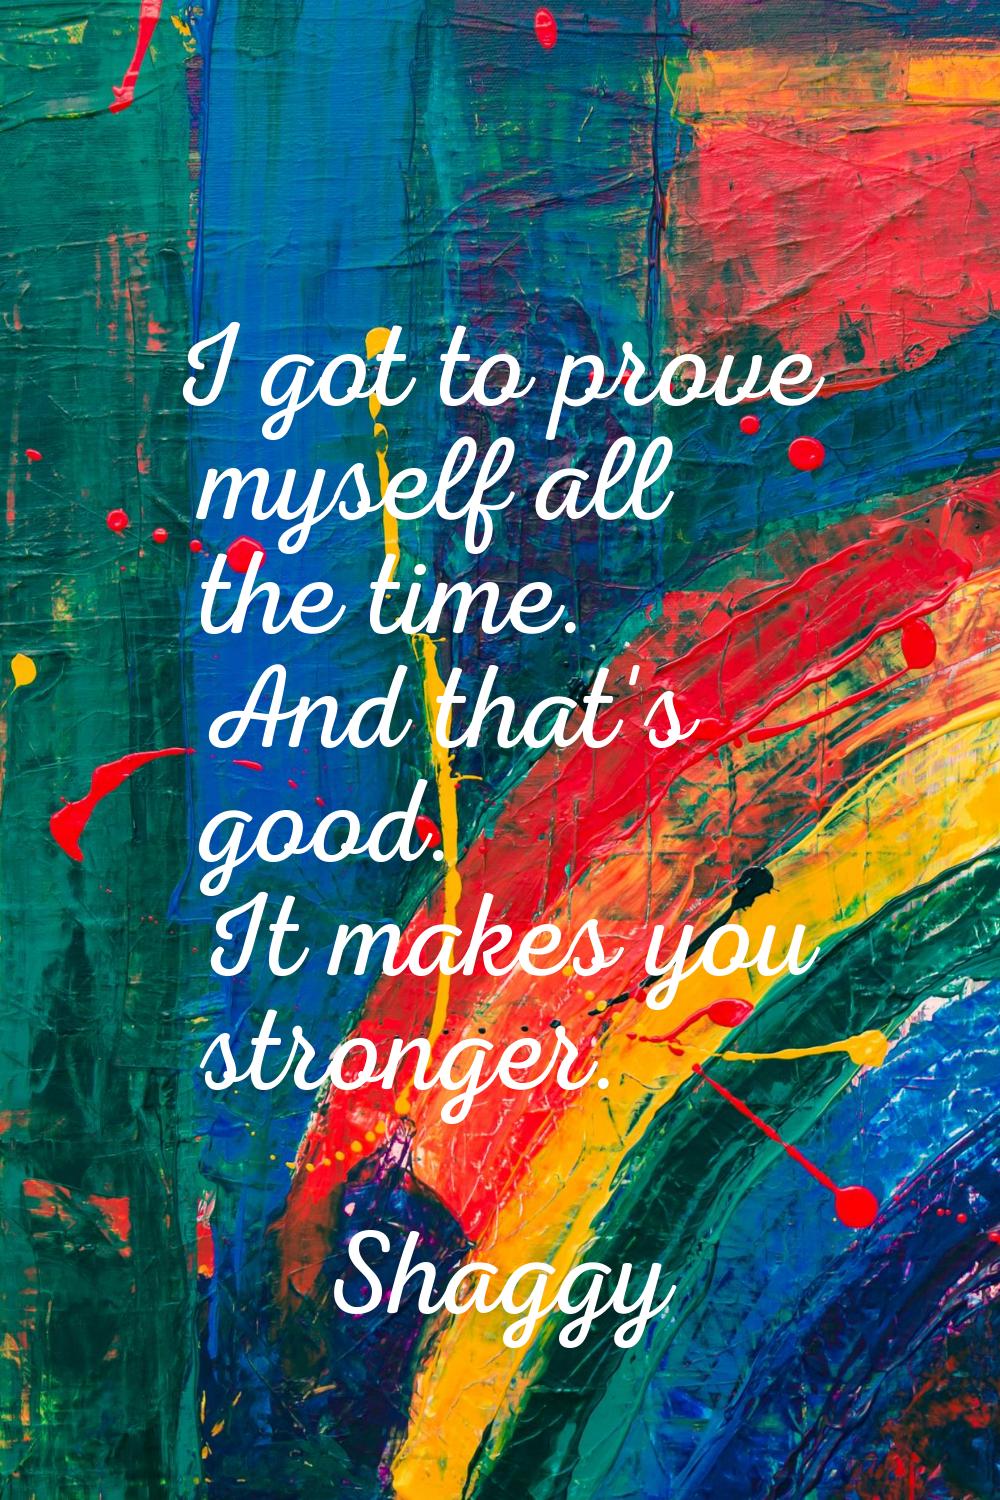 I got to prove myself all the time. And that's good. It makes you stronger.